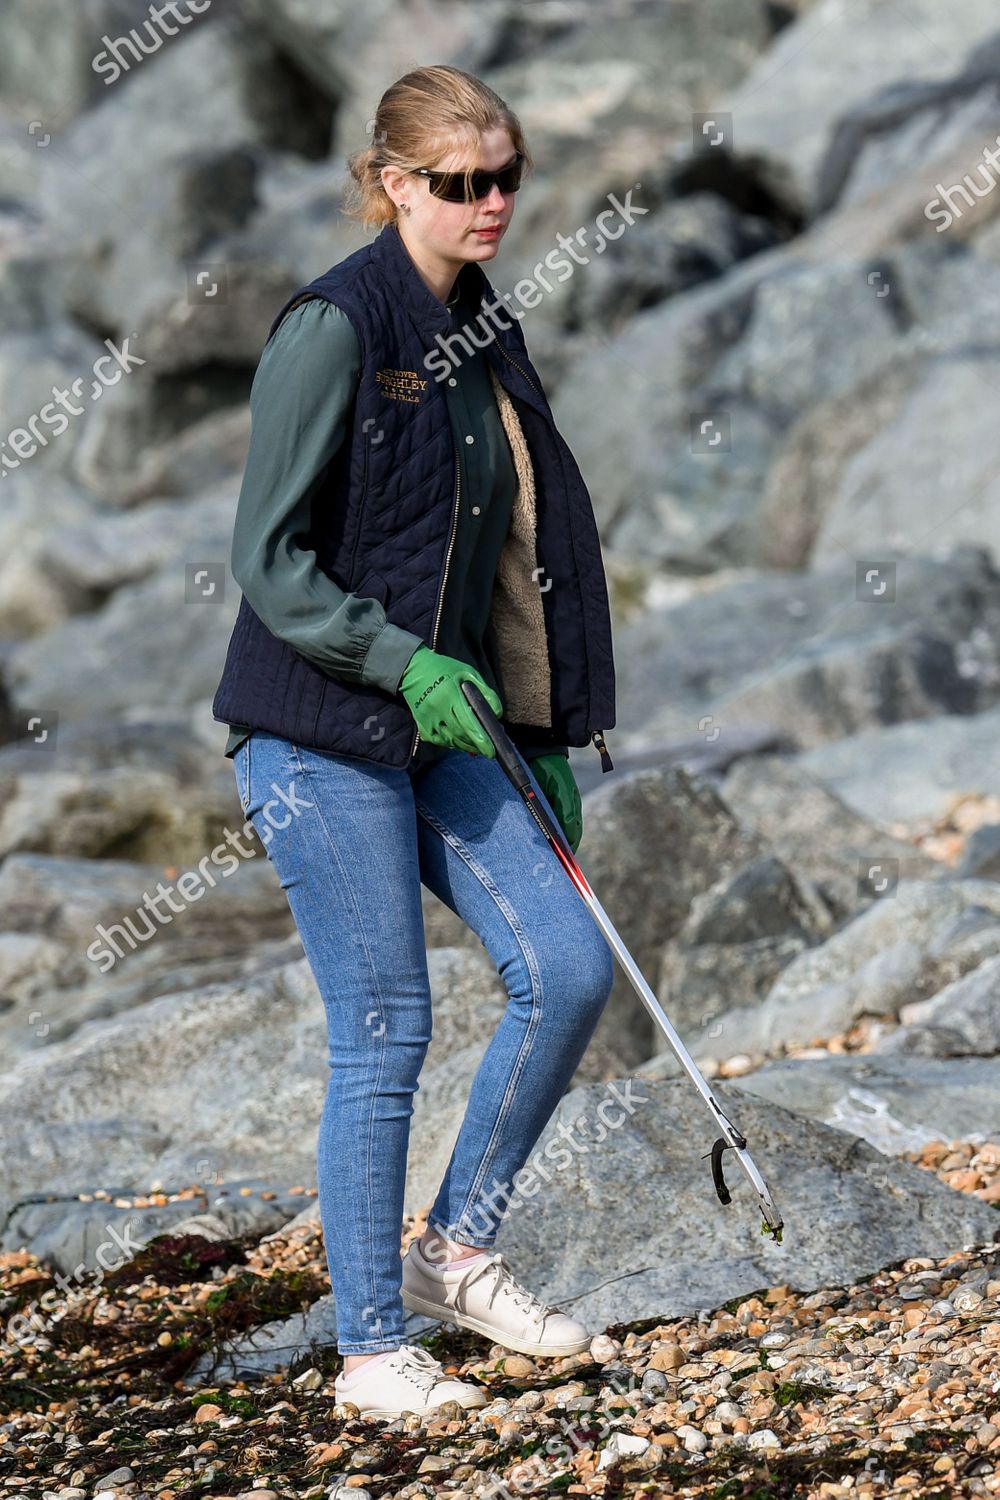 prince-edward-and-sophie-countess-of-wessex-great-british-beach-clean-southsea-beach-portsmouth-uk-shutterstock-editorial-10782998by.jpg